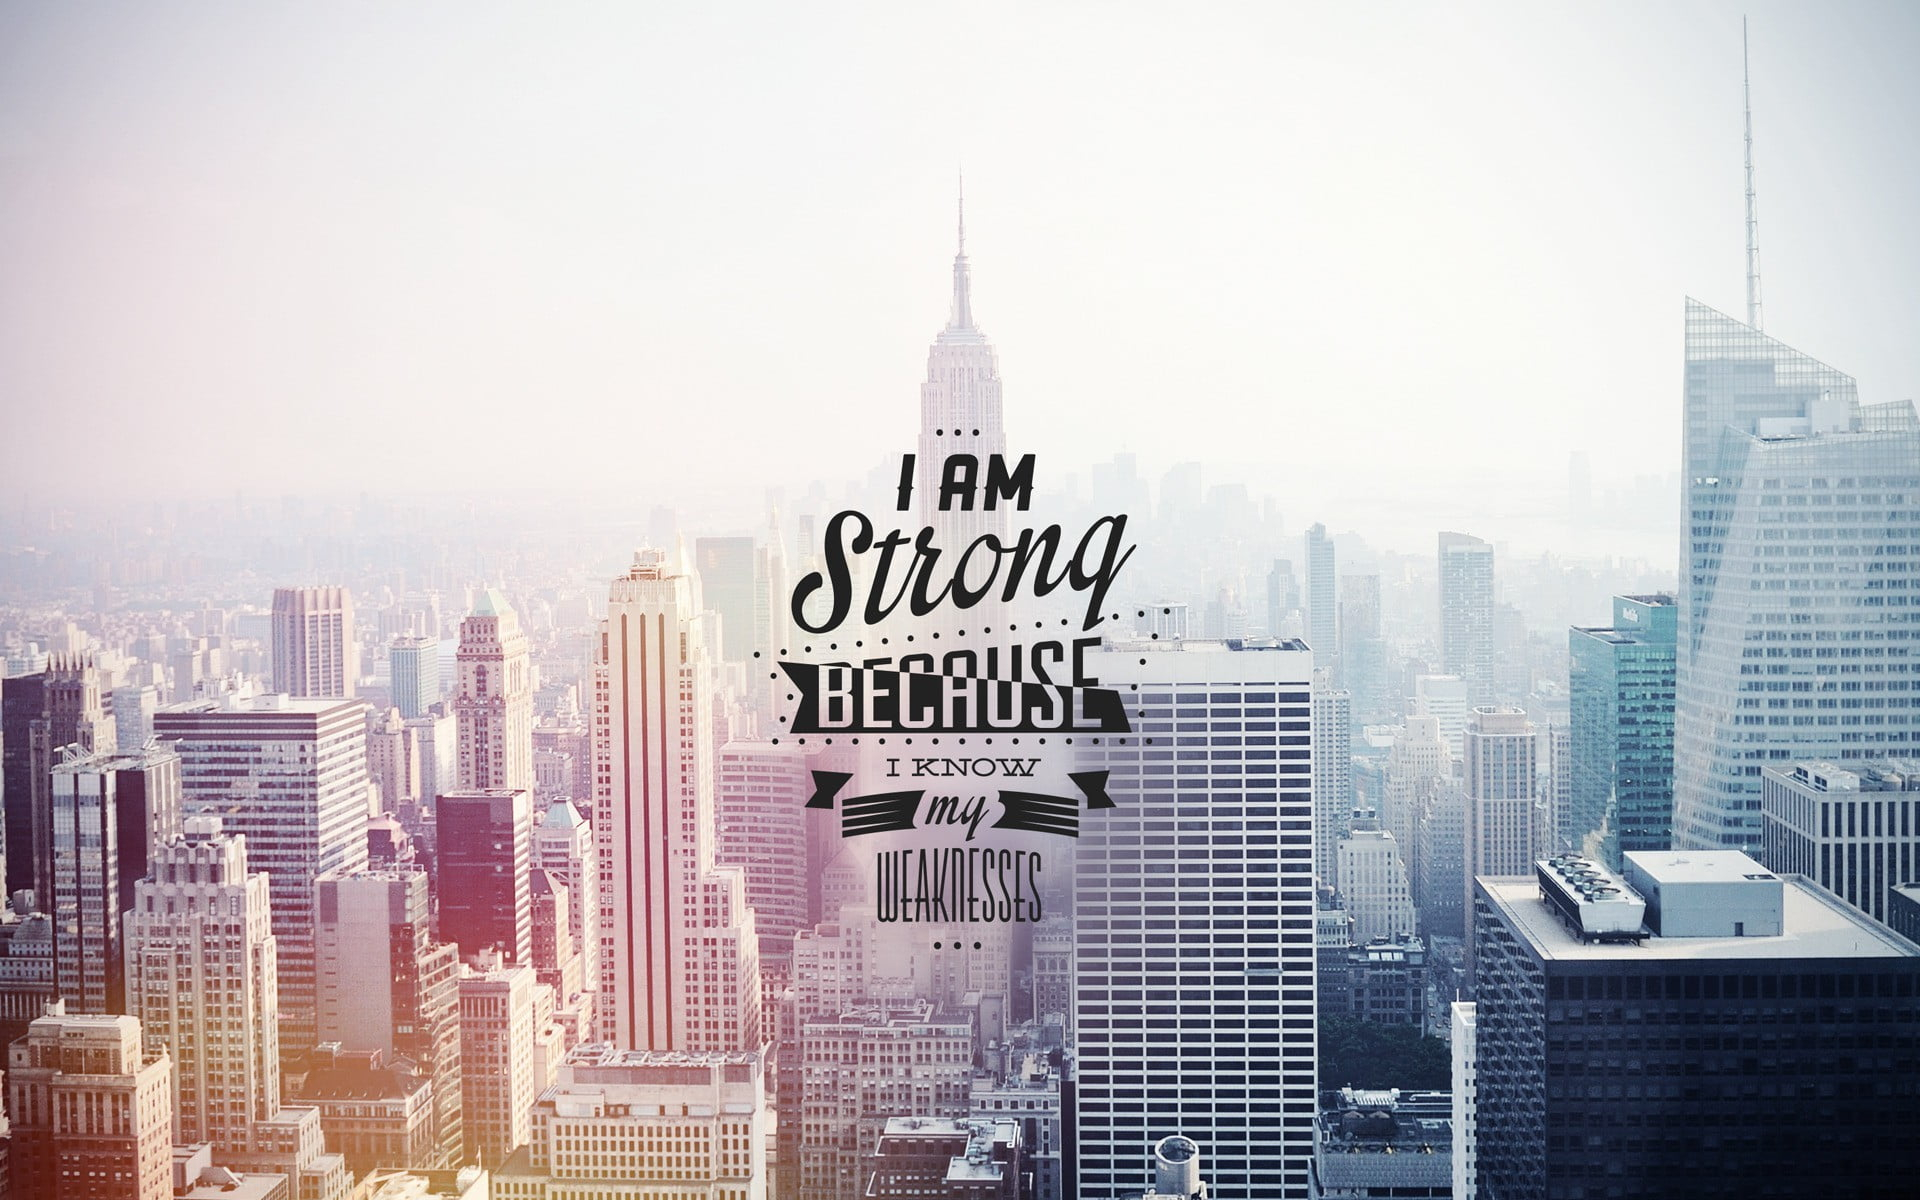 I Am Strong Wallpapers